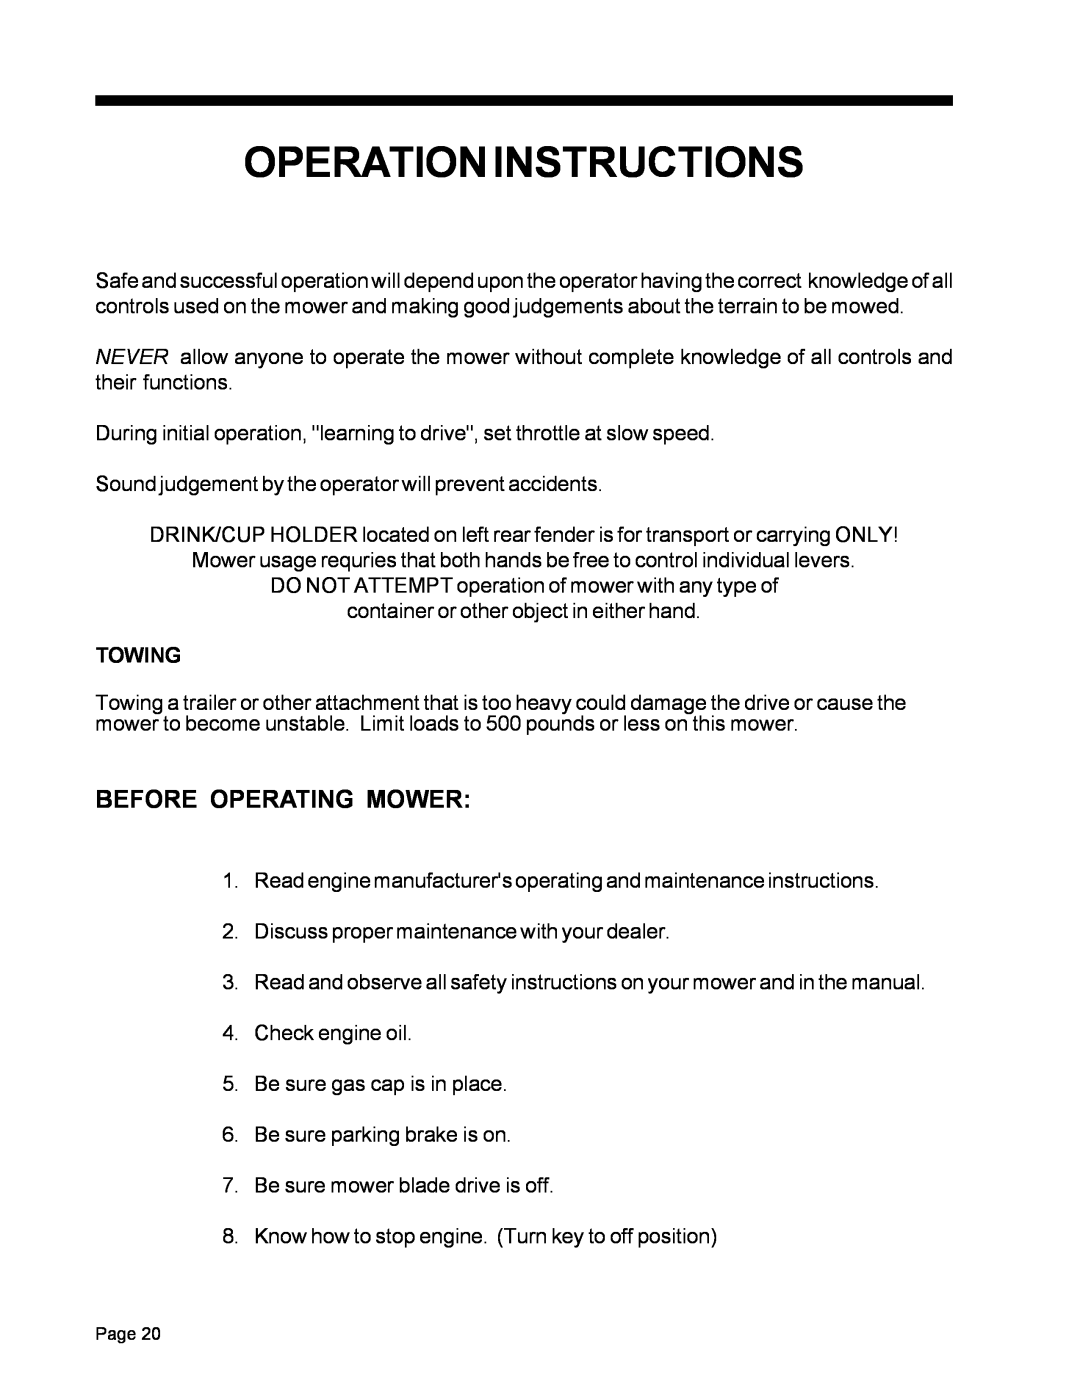 Dixon ZTR 5022, ZTR 5017 manual Operation Instructions, Before Operating Mower, Towing 